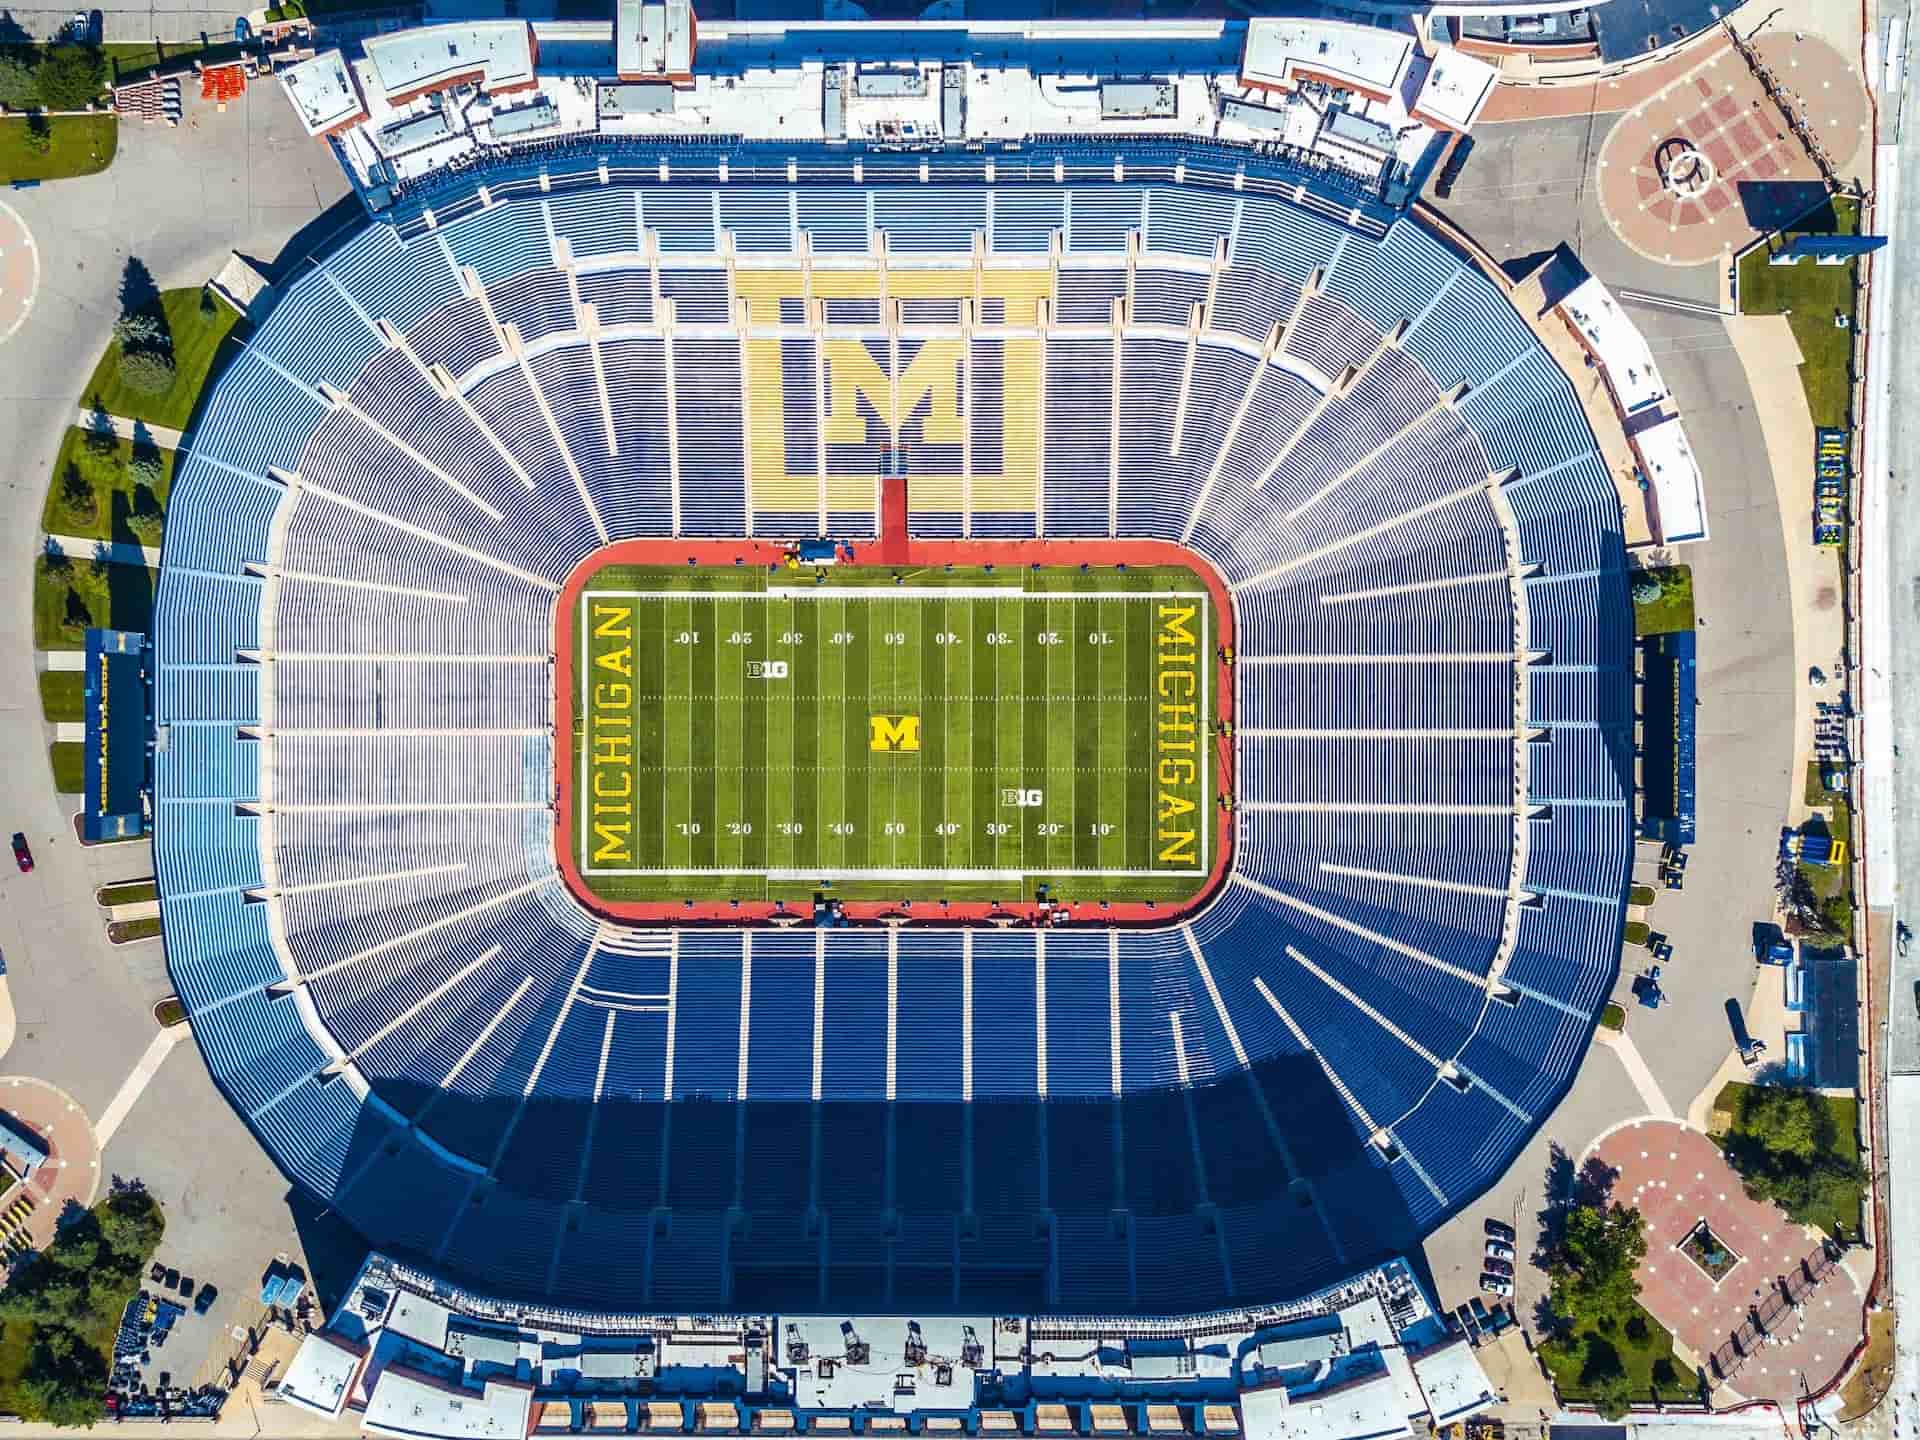 Go Blue in College Town, U.S.A.: 15 Things to Do in Ann Arbor